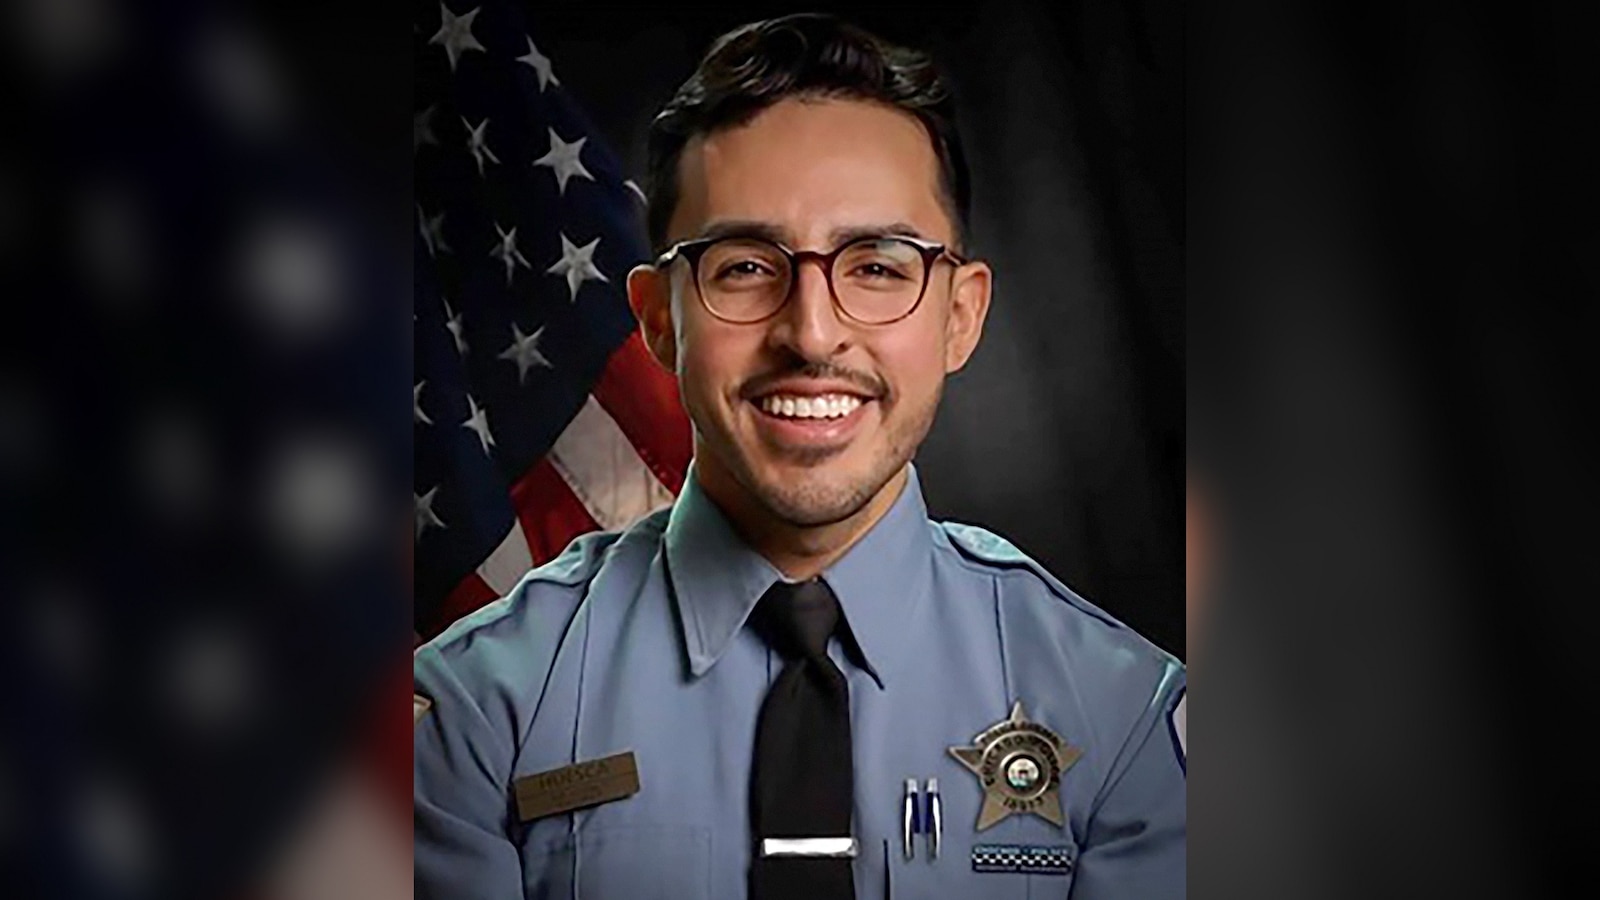 Slain Chicago police Officer Luis Huesca’s sister pleads for public to help in catching the killer: ‘The pain is unbearable’ [Video]